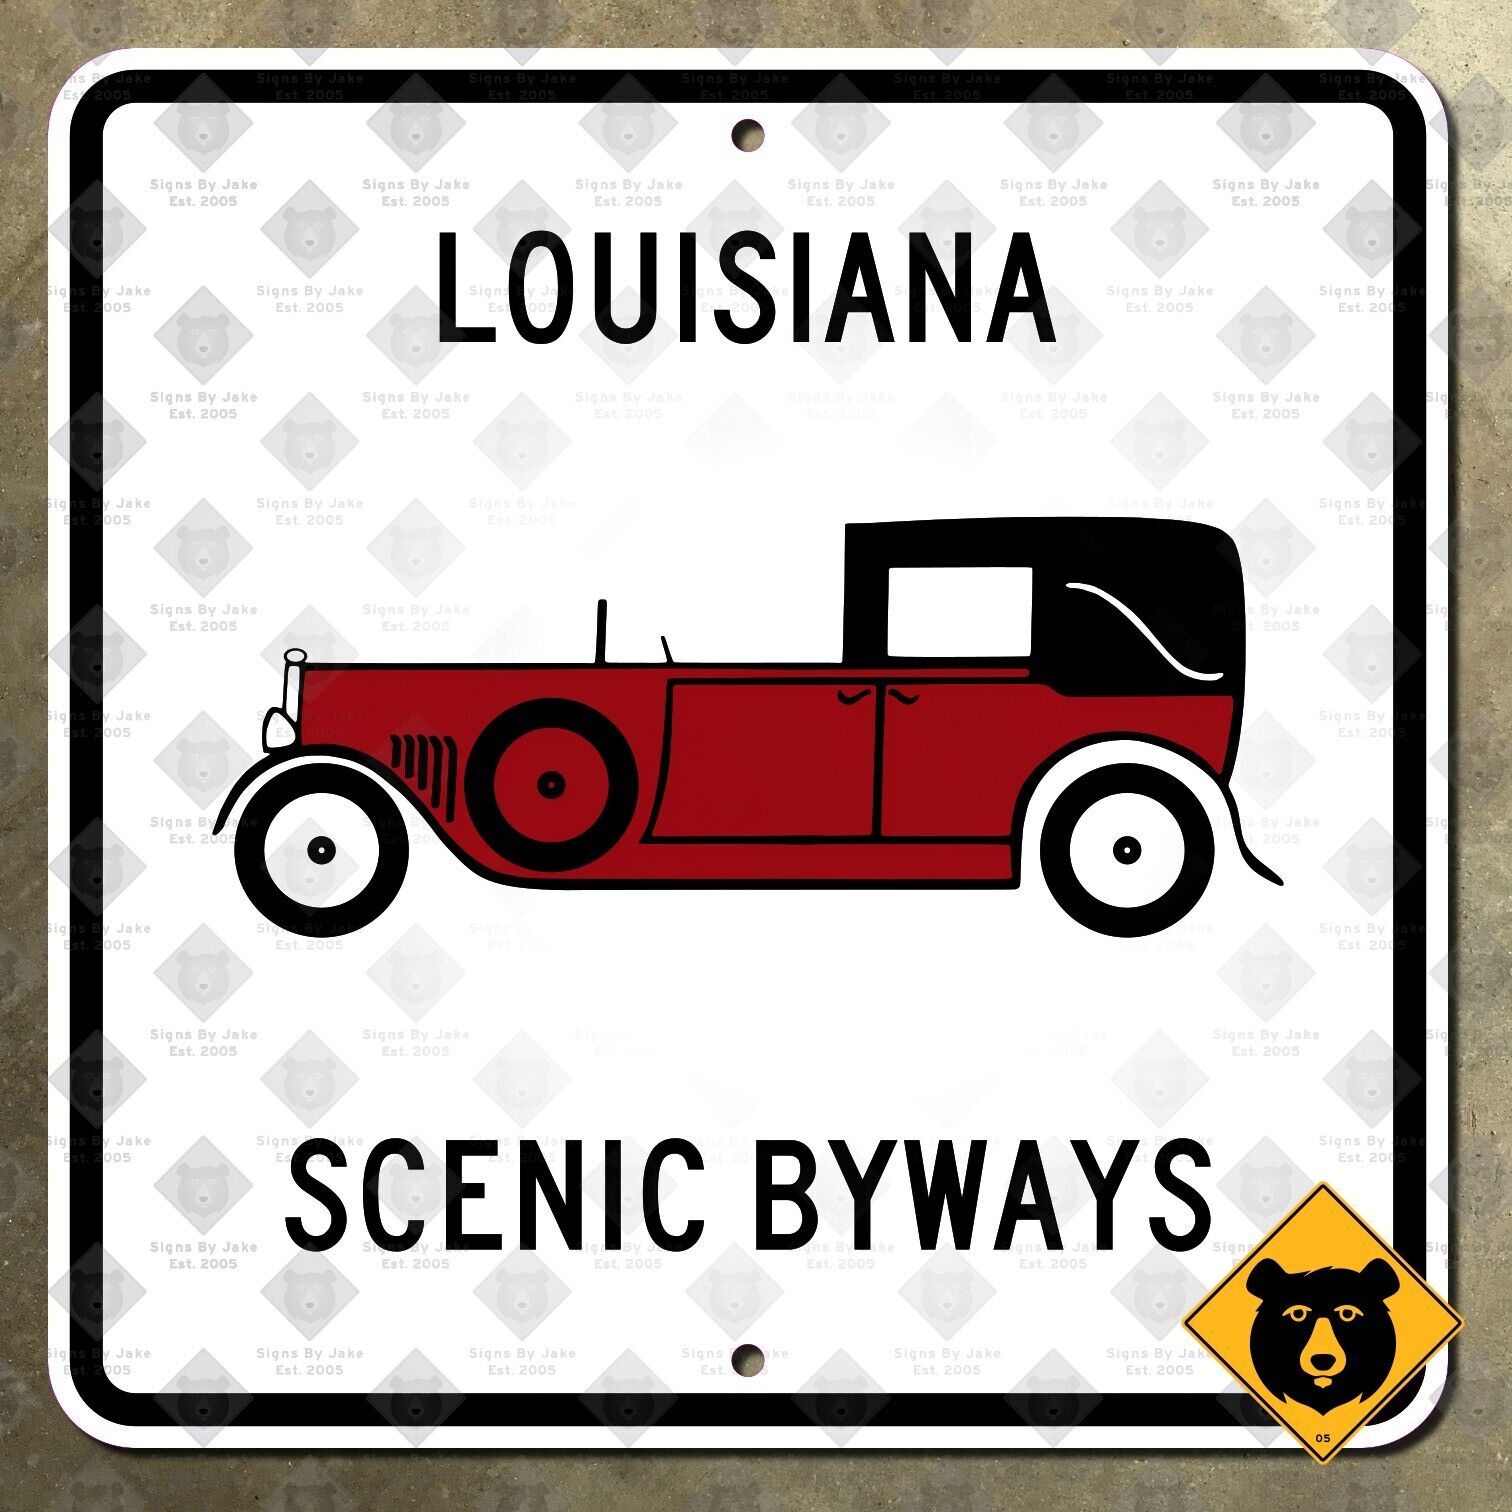 Louisiana Scenic Byways classic car highway marker 1993 road guide sign 12x12